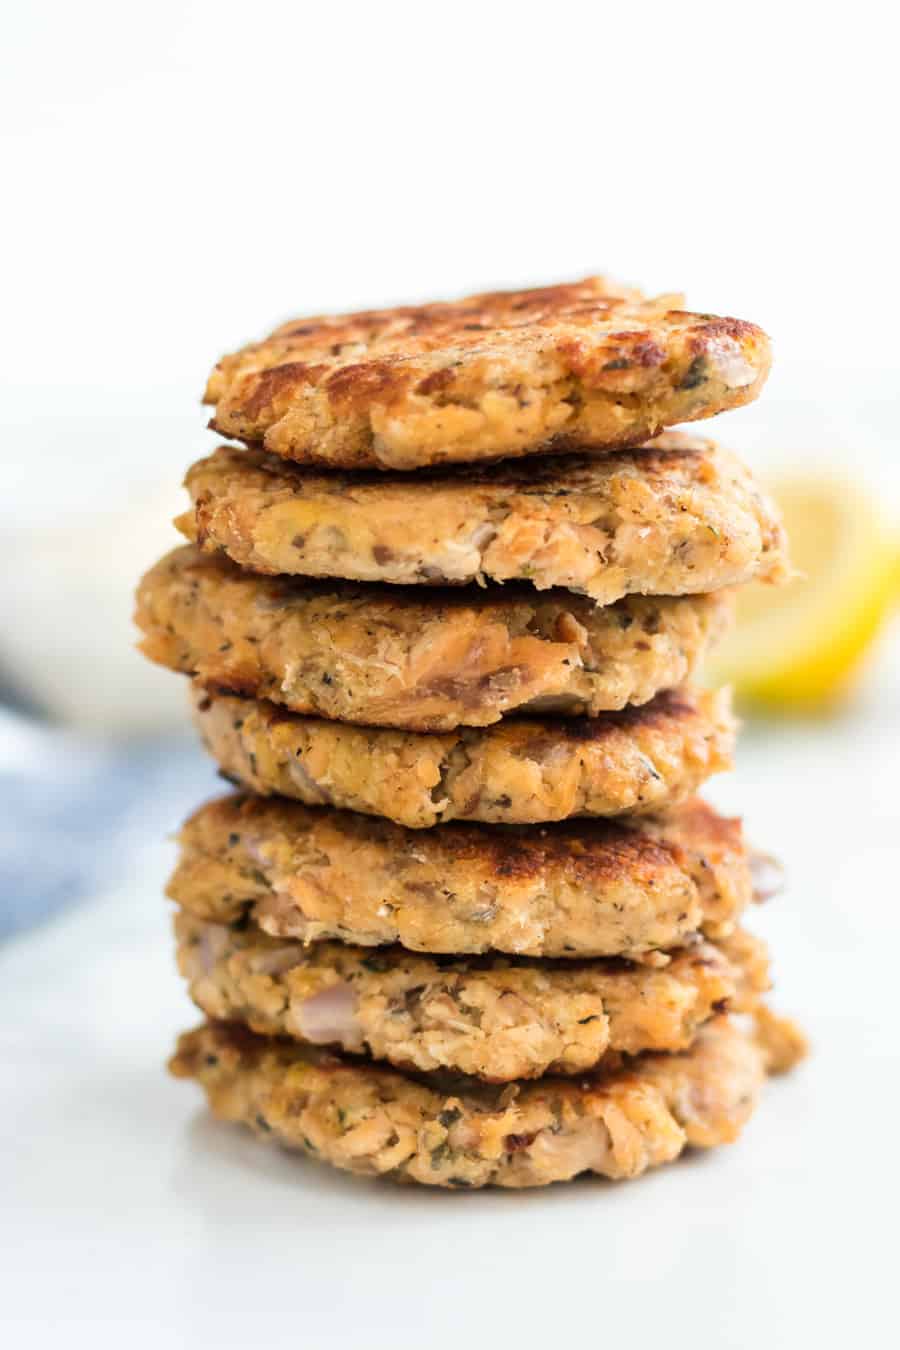 Homemade salmon patties made with canned salmon, dried bread crumbs, onion, and a few other simple ingredient that only take about 30 minutes to make.